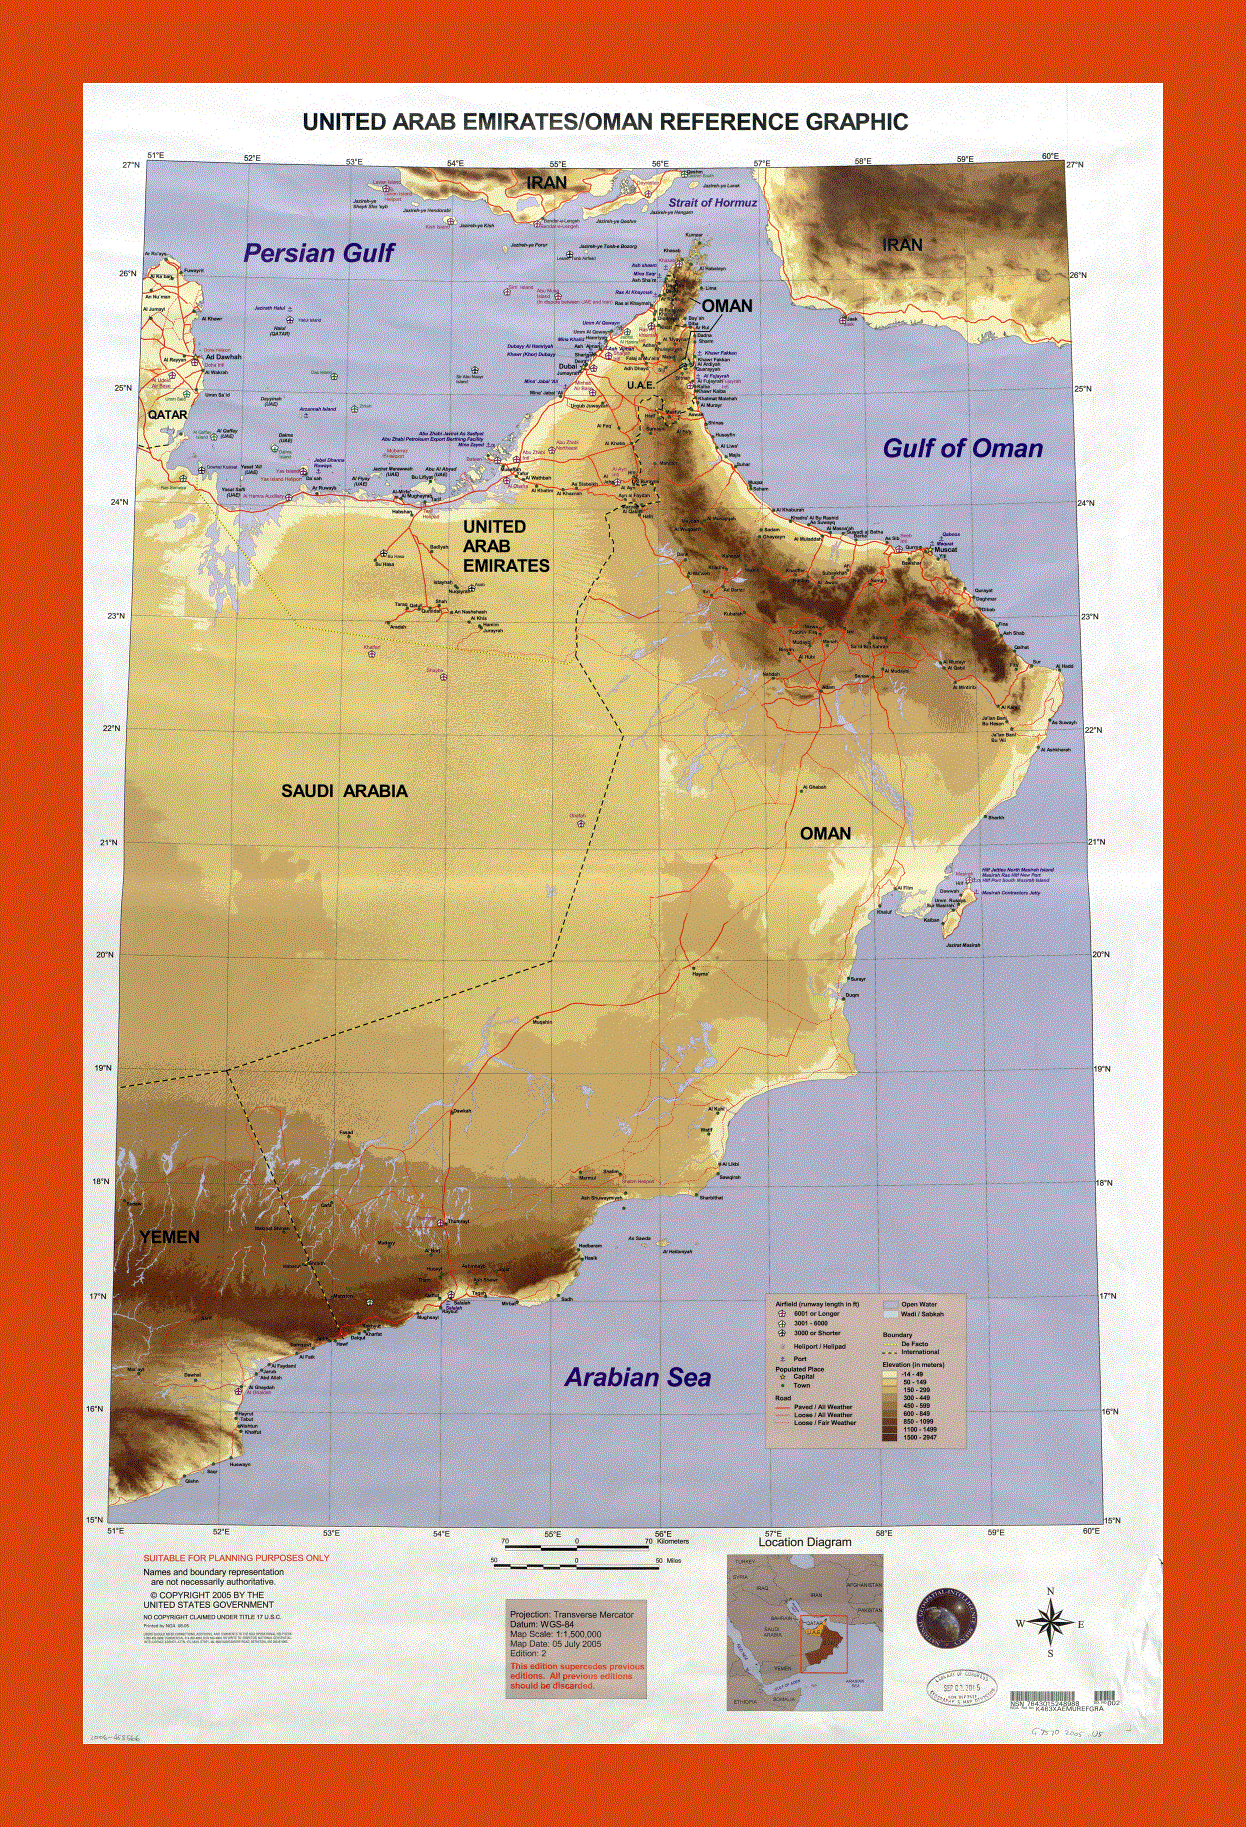 United Arab Emirates and Oman reference graphic map - 2005